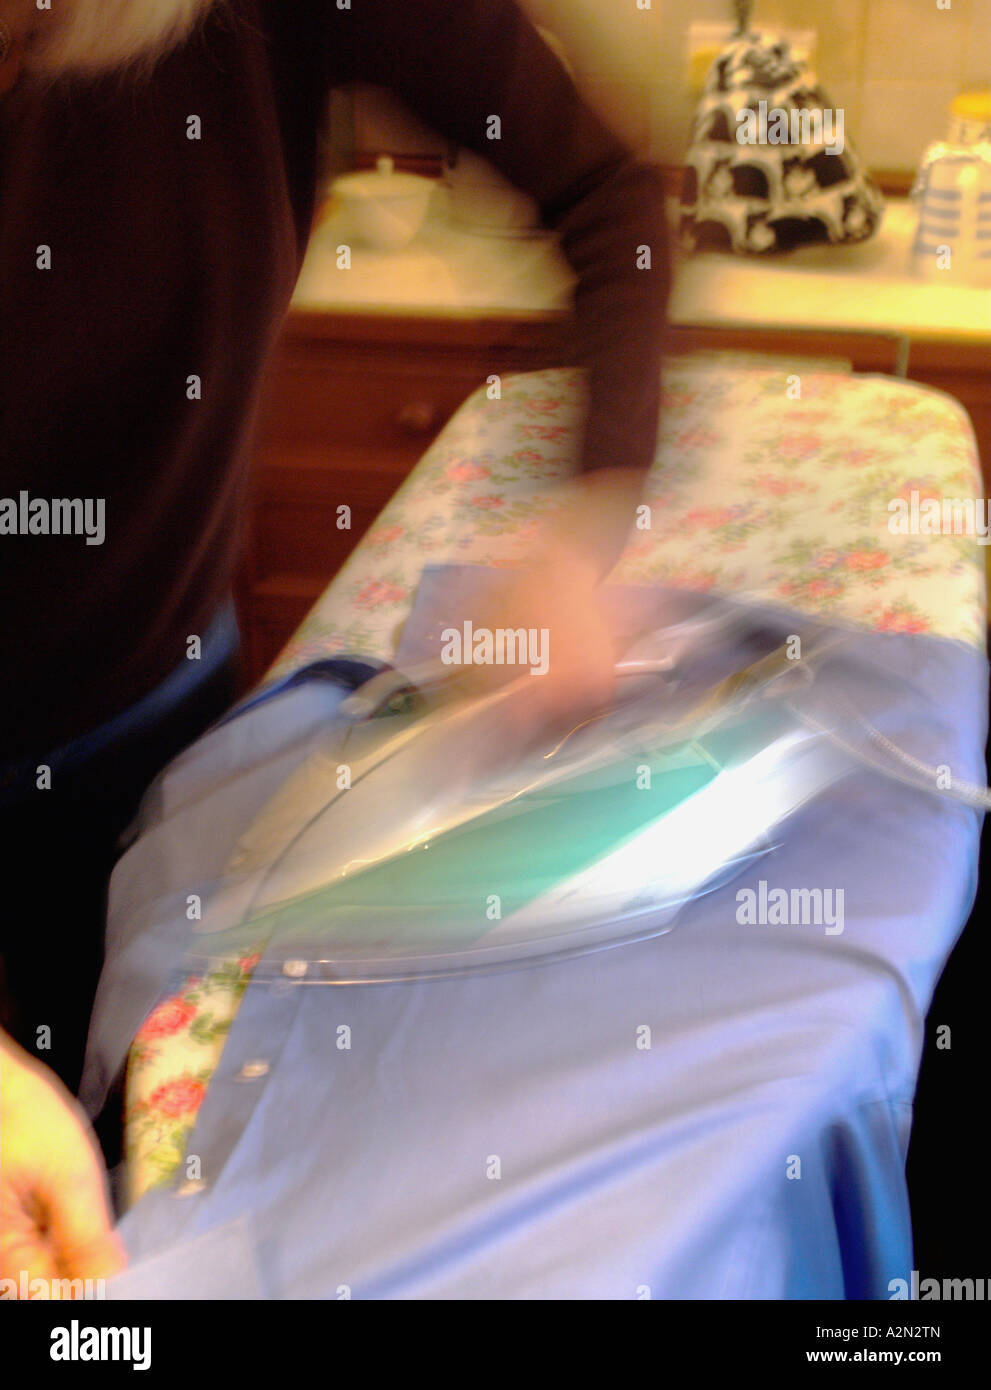 A woman ironing in the kitchen Stock Photo